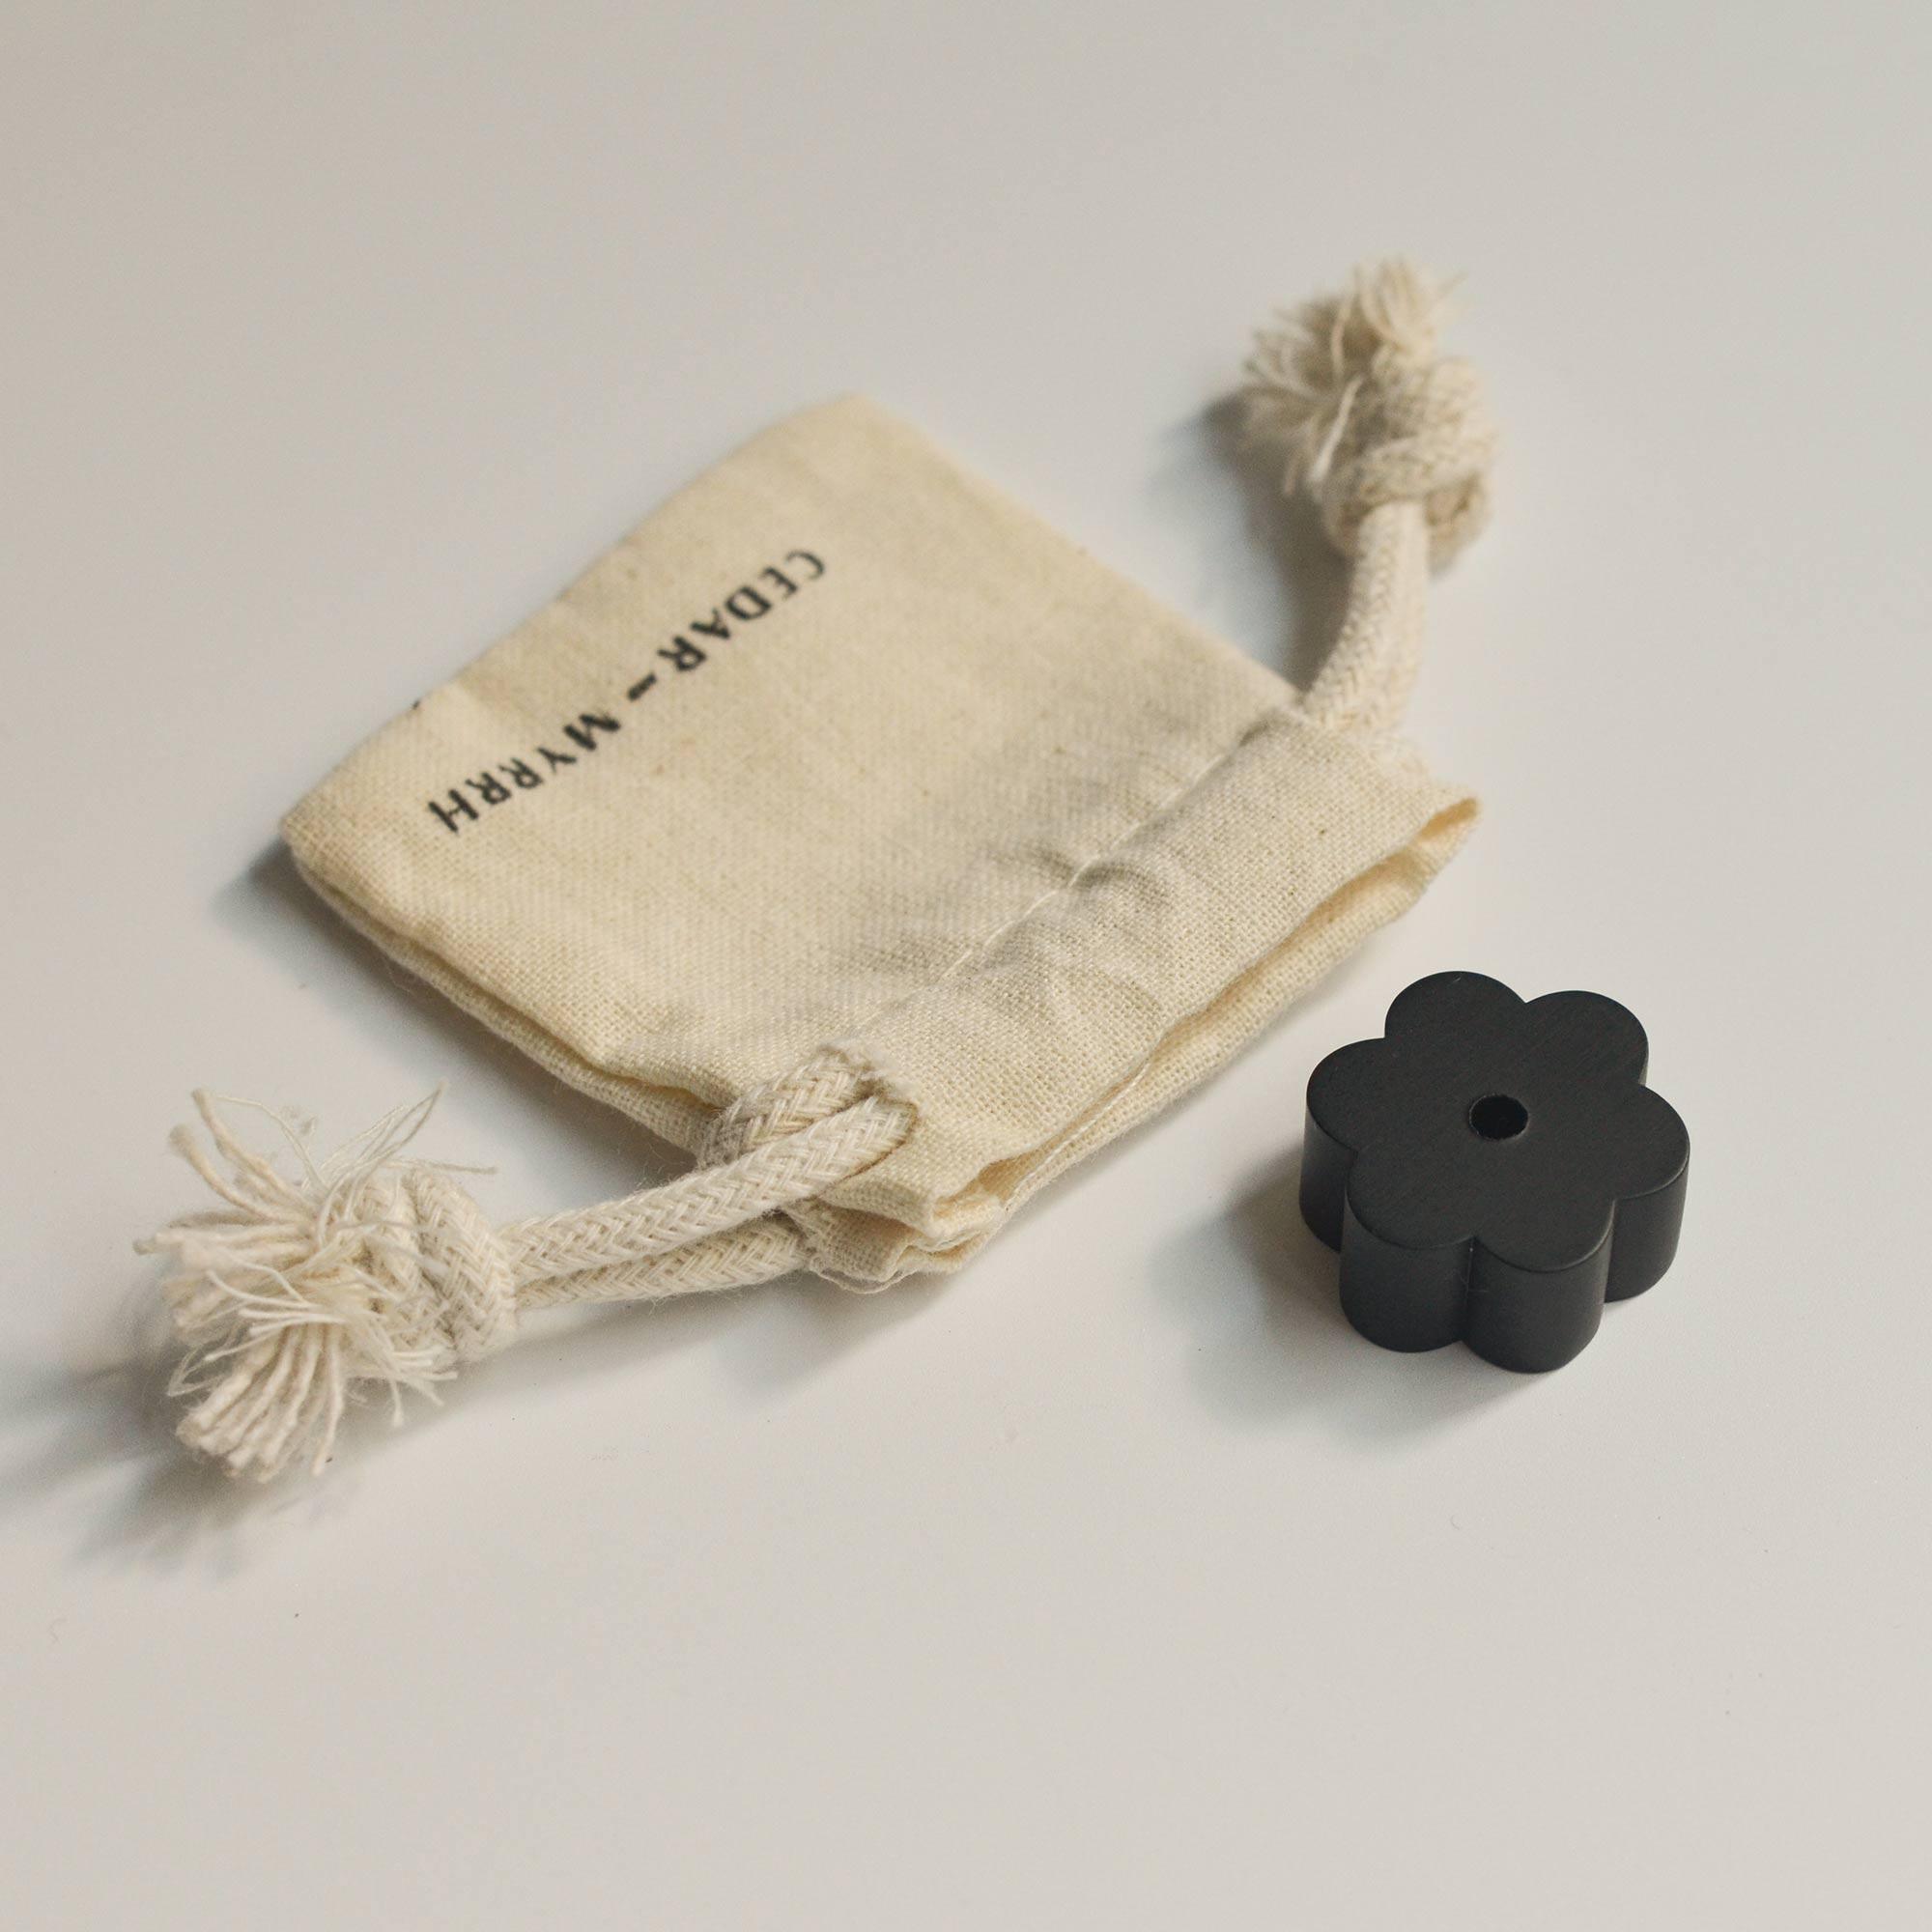 flower black coated incense holder with pouch